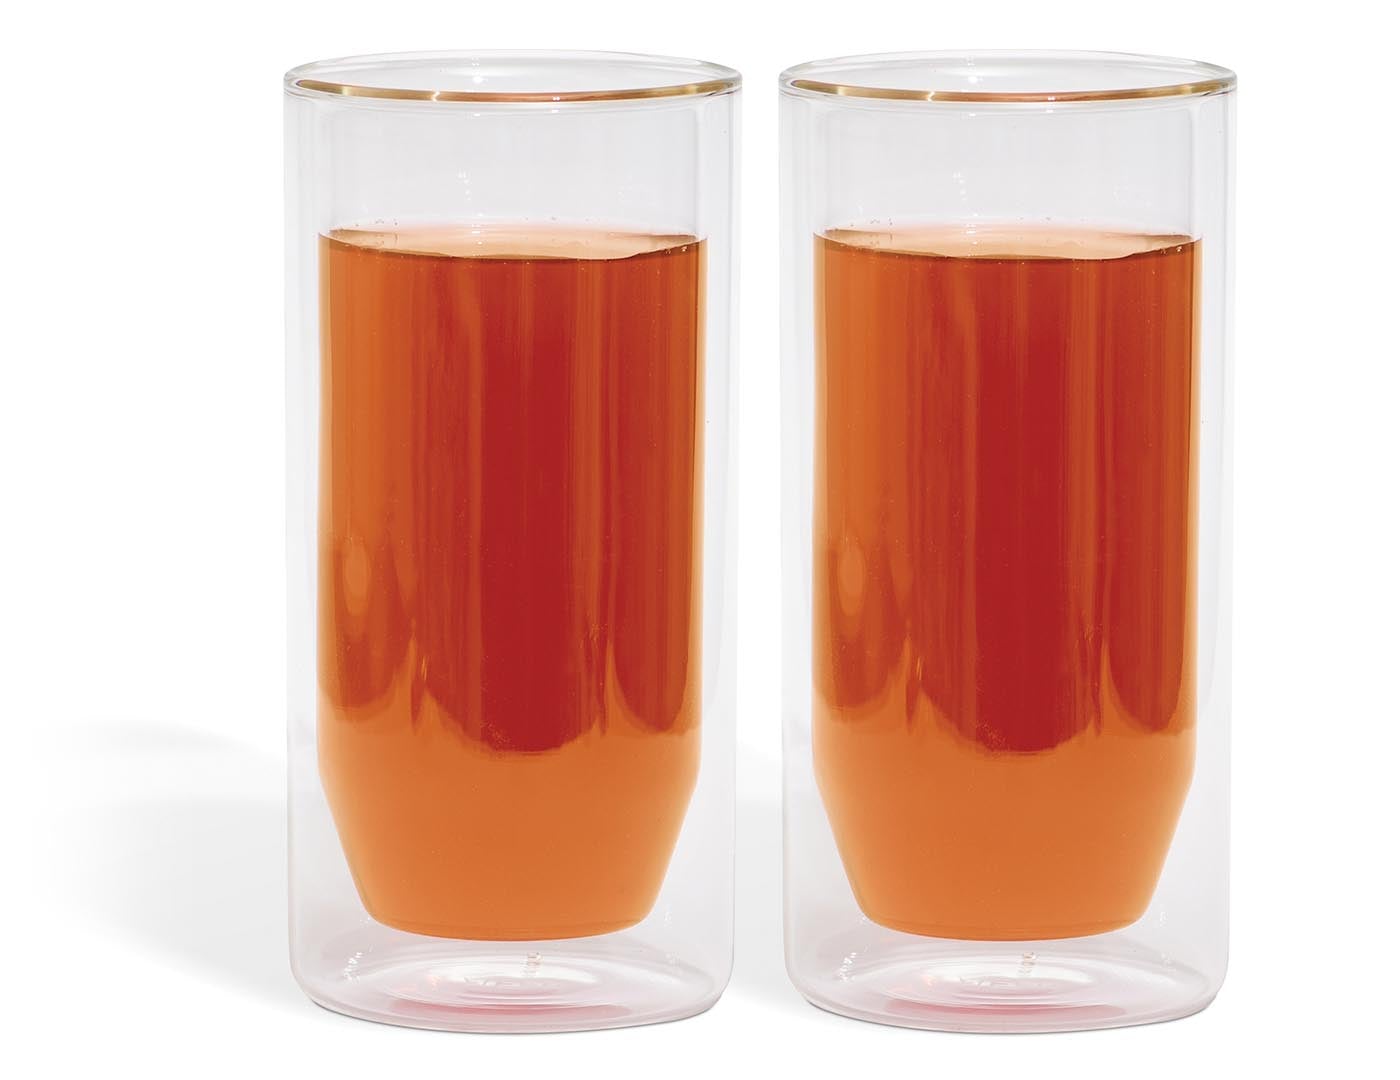 Two double-walled glasses with brewed tea inside each